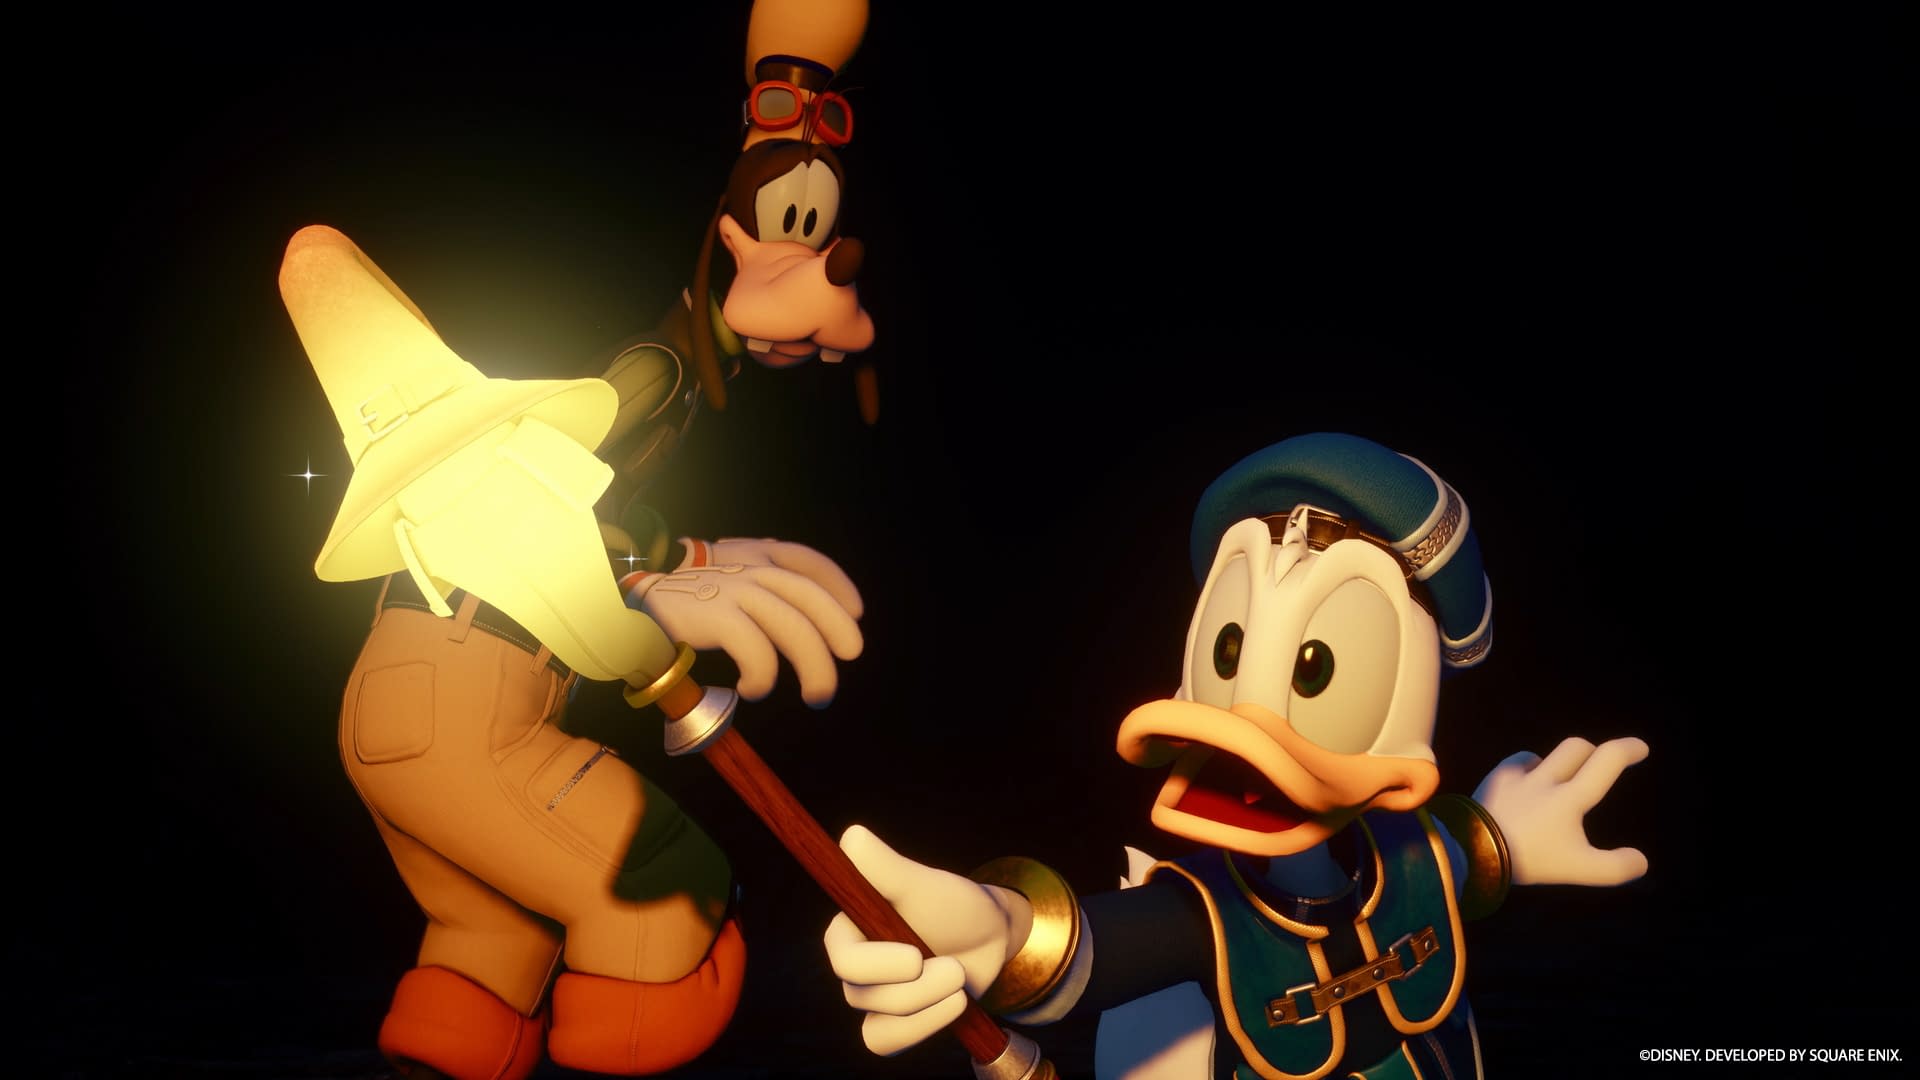 Kingdom Hearts Missing Link LOOKS AMAZING! New Details, Gameplay & MORE! 